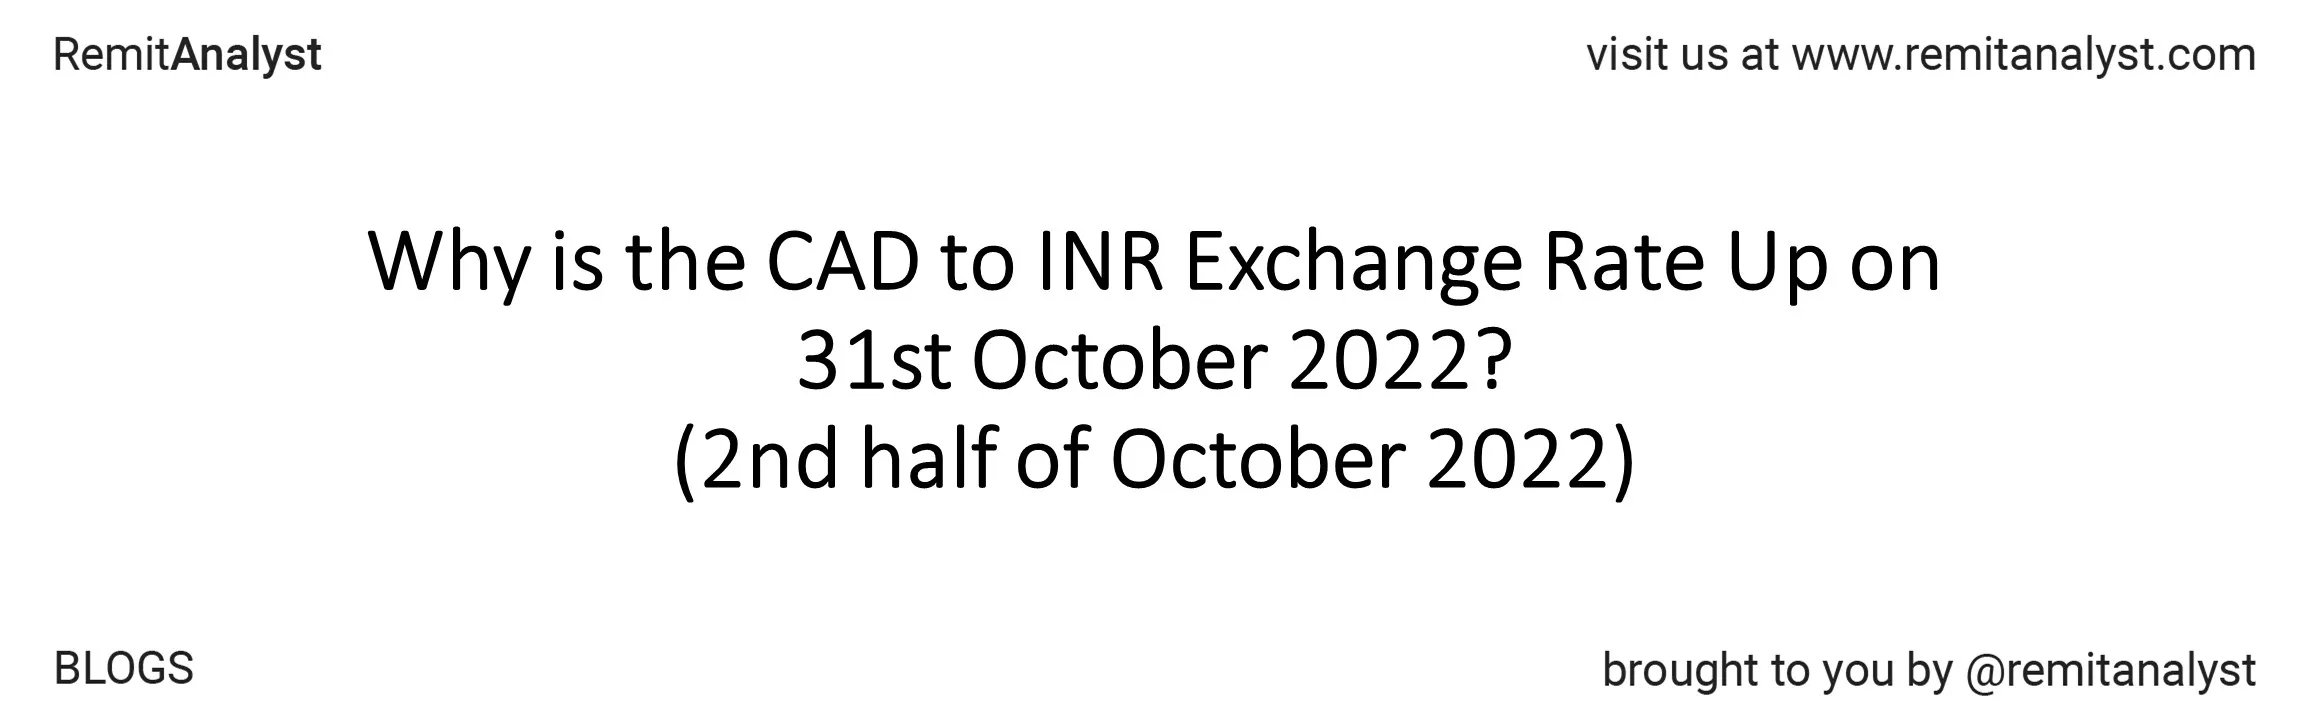 cad-to-inr-exchange-rate-from-16-oct-2022-to-31-oct-2022-title